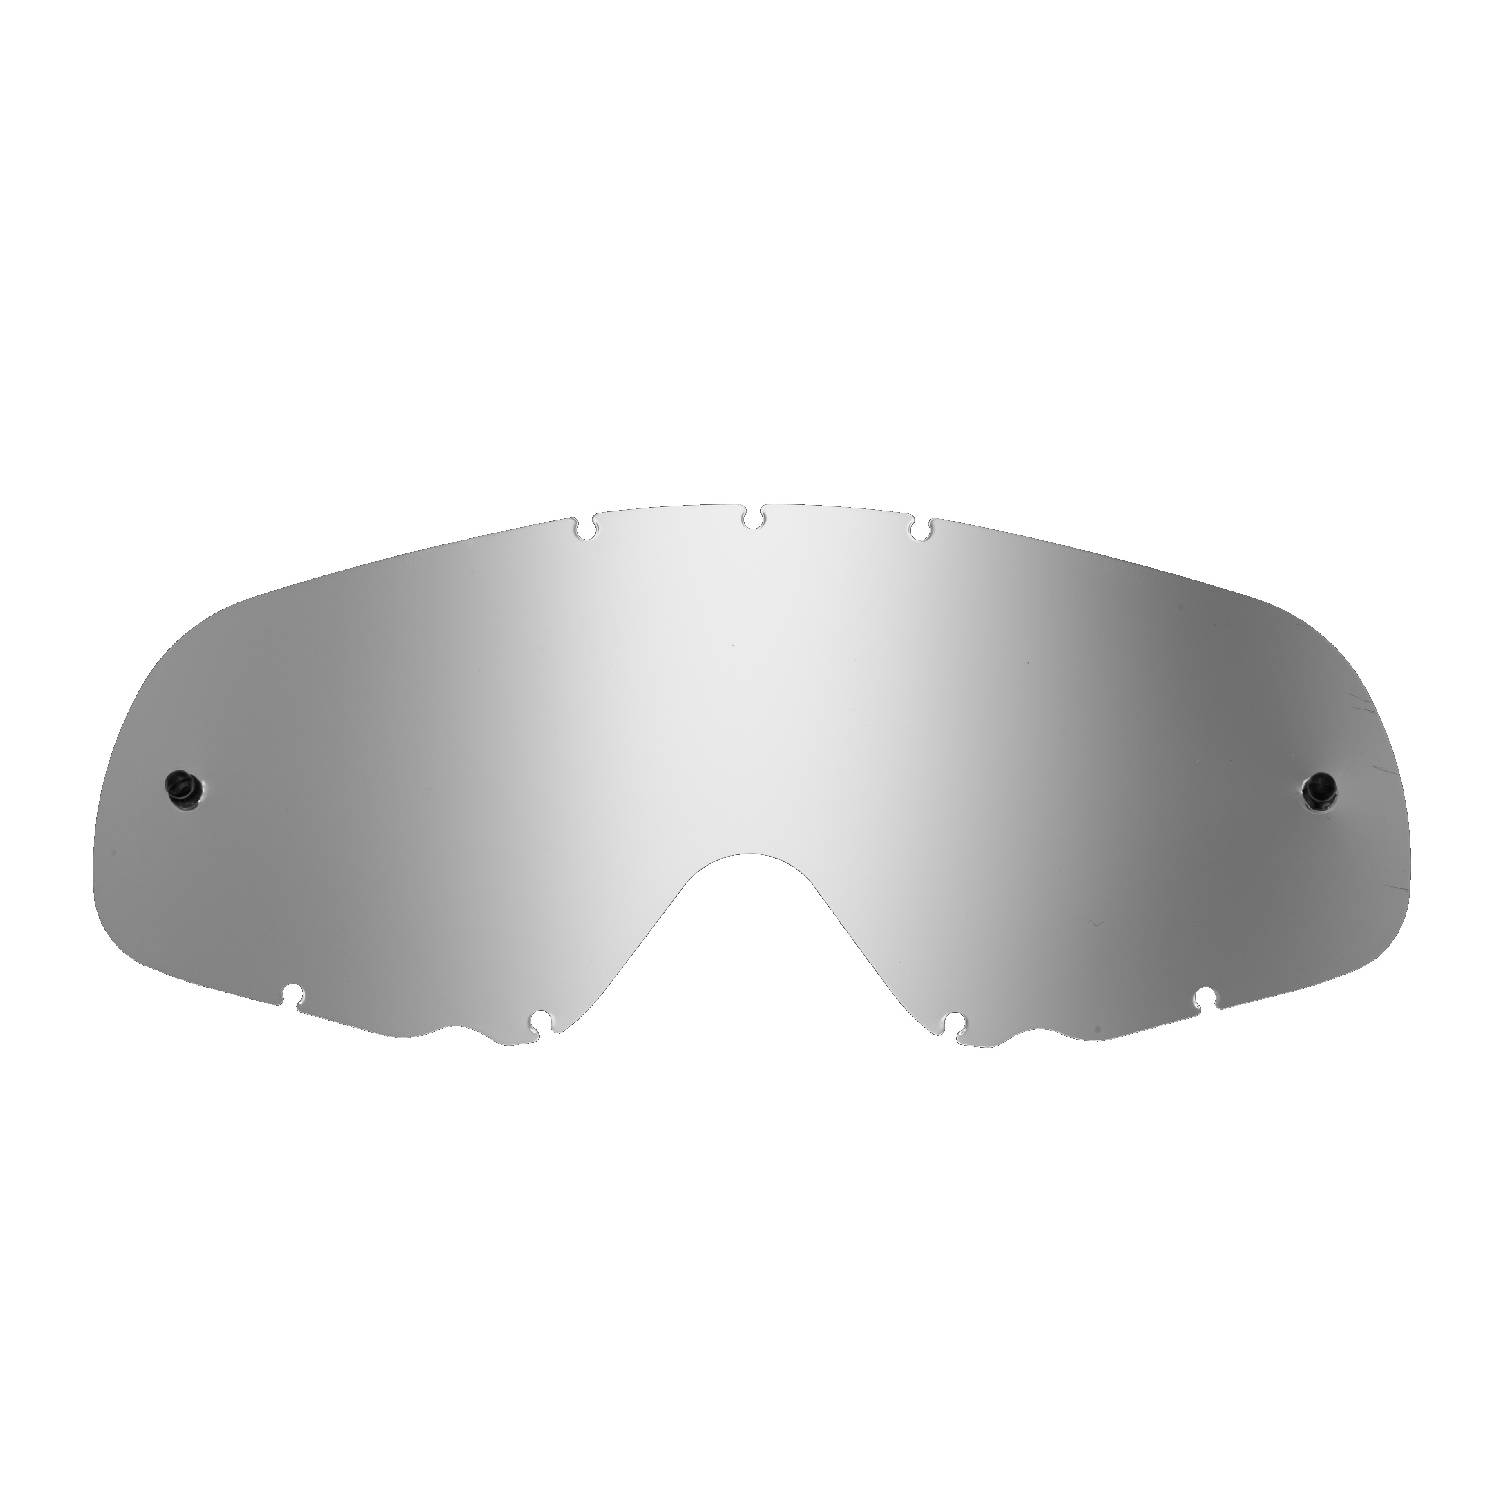 silver-toned mirrored replacement lenses  compatible for Oakley Crowbar goggle